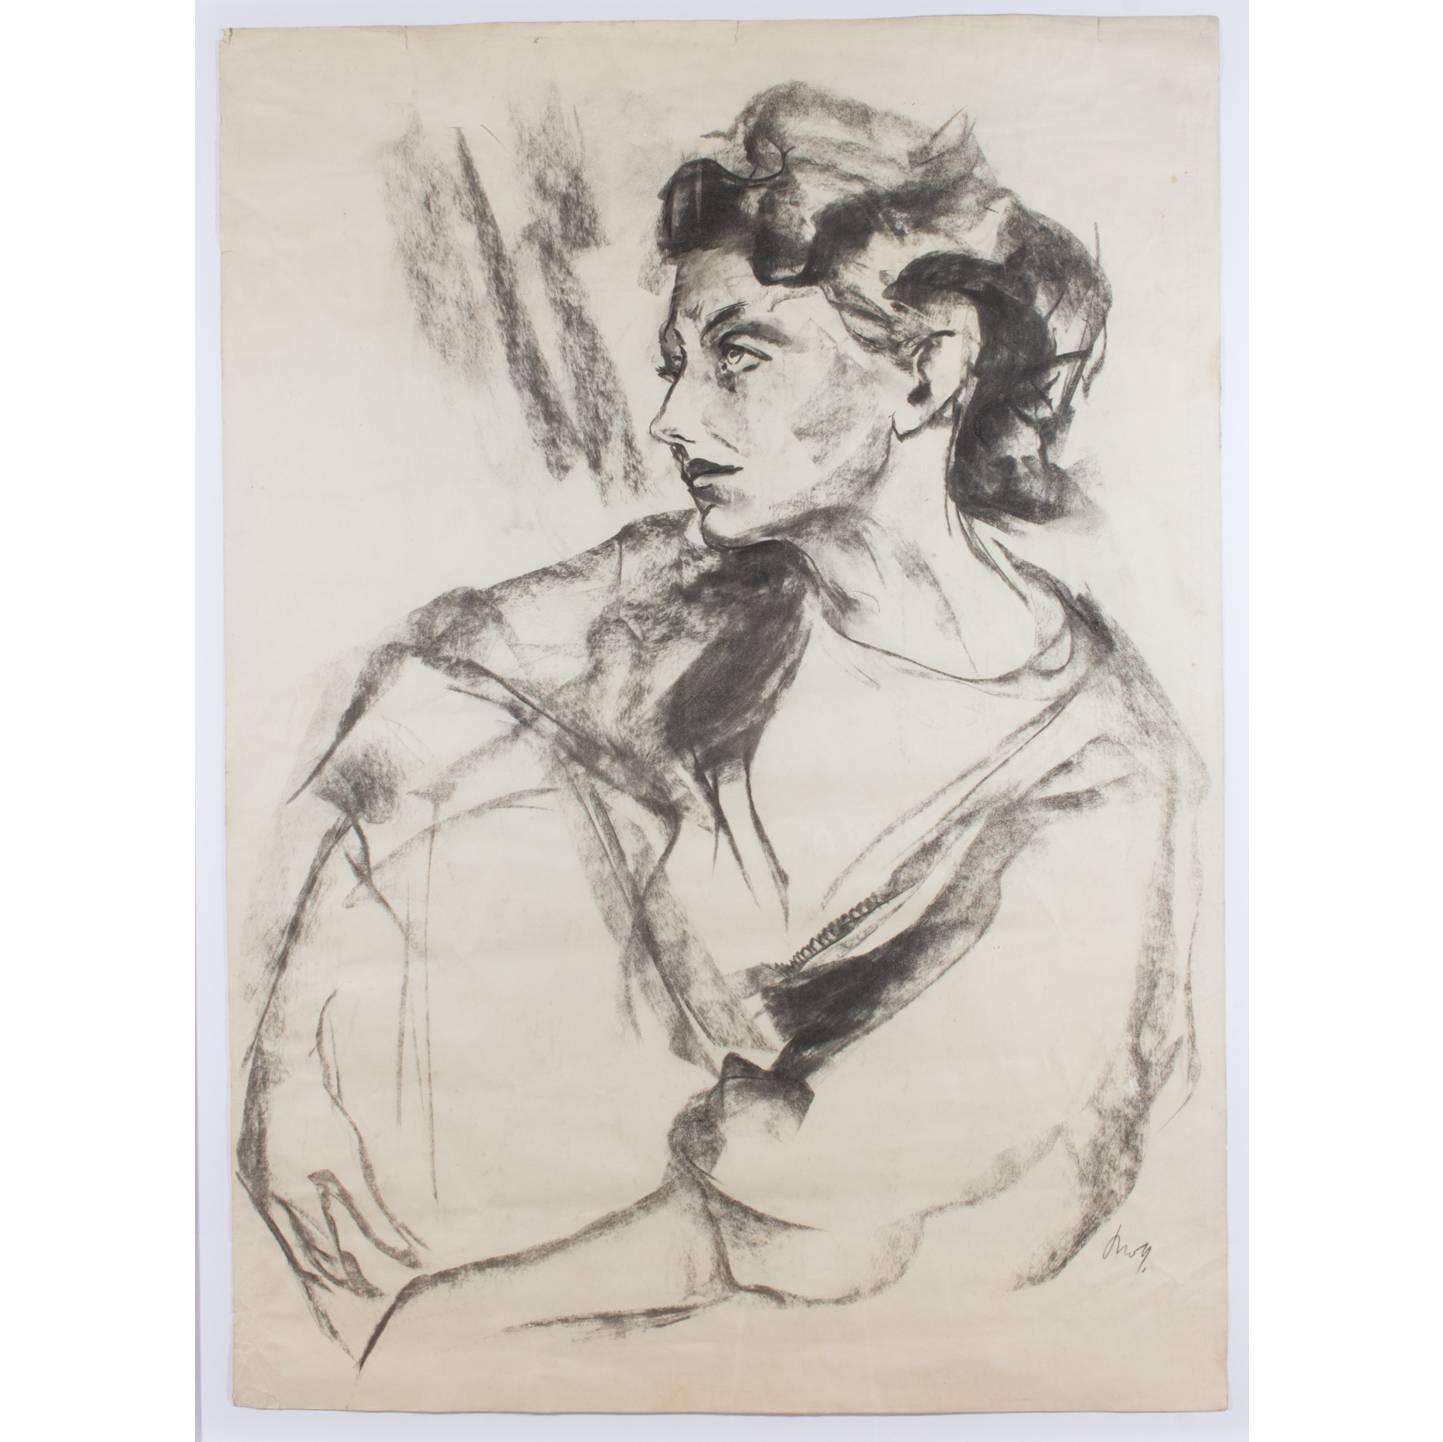 Discovered in a Parisian market on the Left Bank, this stunning charcoal portrait of a woman dates to the mid-twentieth century and is signed by the artist. We had it framed in an understated, yet versatile metallic champagne frame that works with